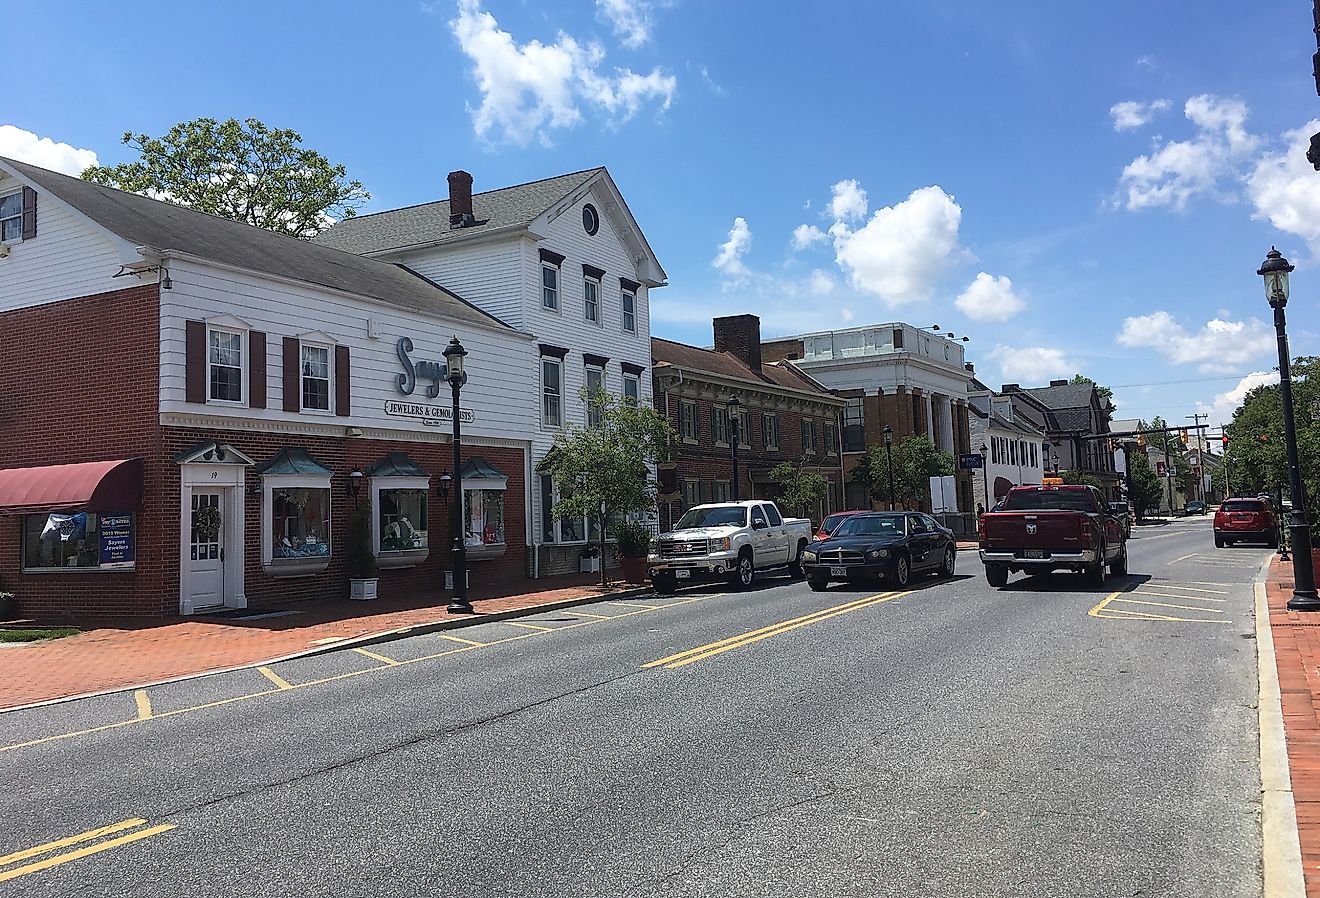 Downtown street in Smyrna, Delaware. Image credit Dough4872, CC BY-SA 4.0 <https://creativecommons.org/licenses/by-sa/4.0>, via Wikimedia Commons